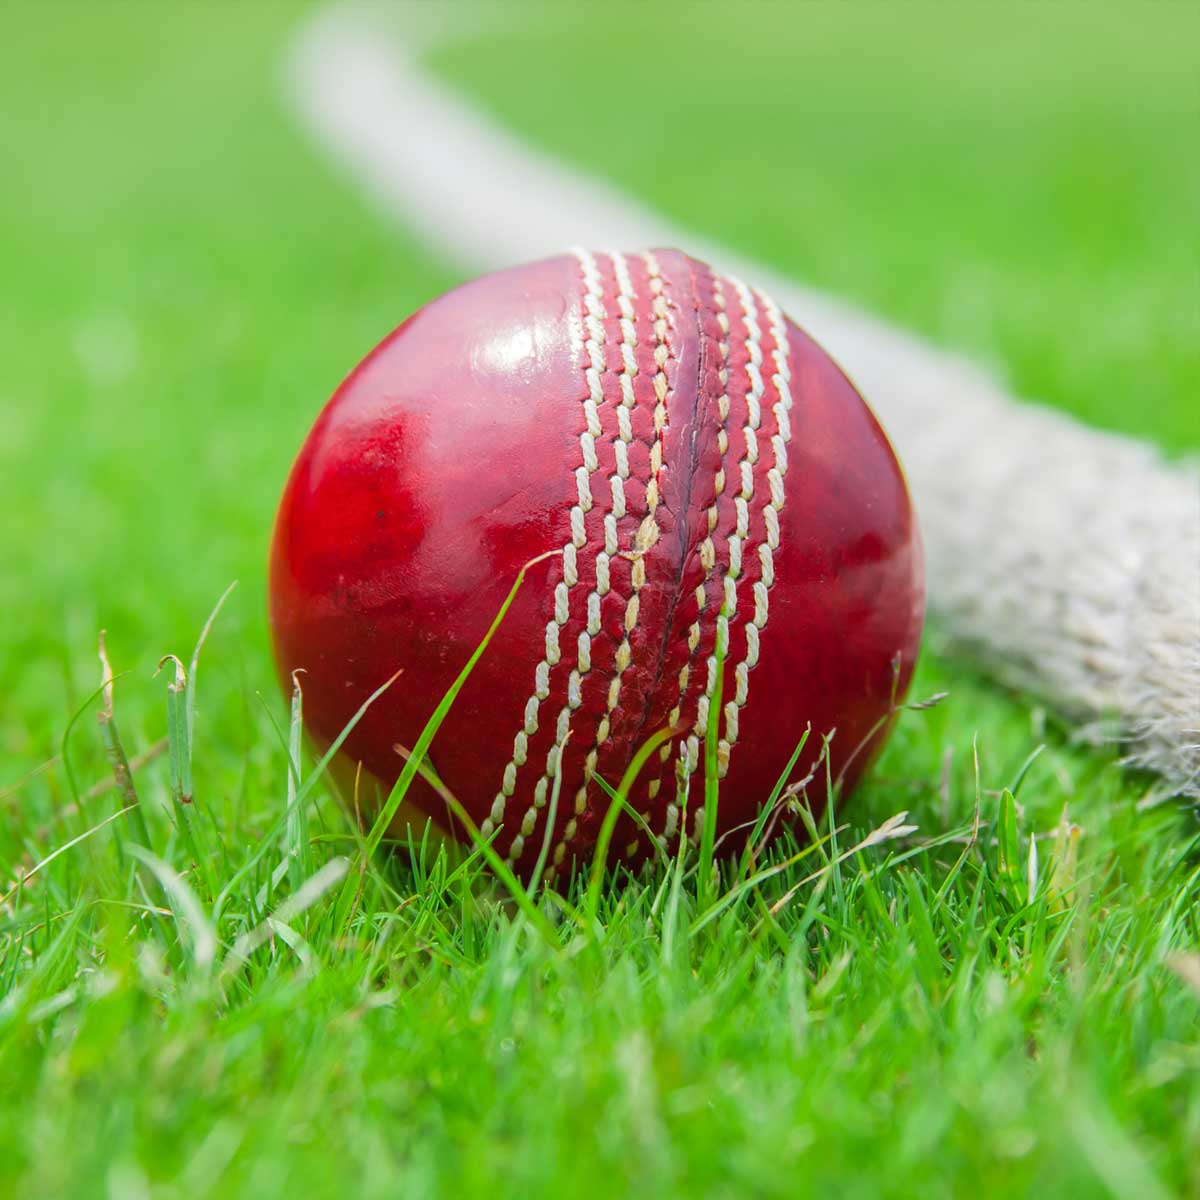 Cricket Balls Manufacturers in China